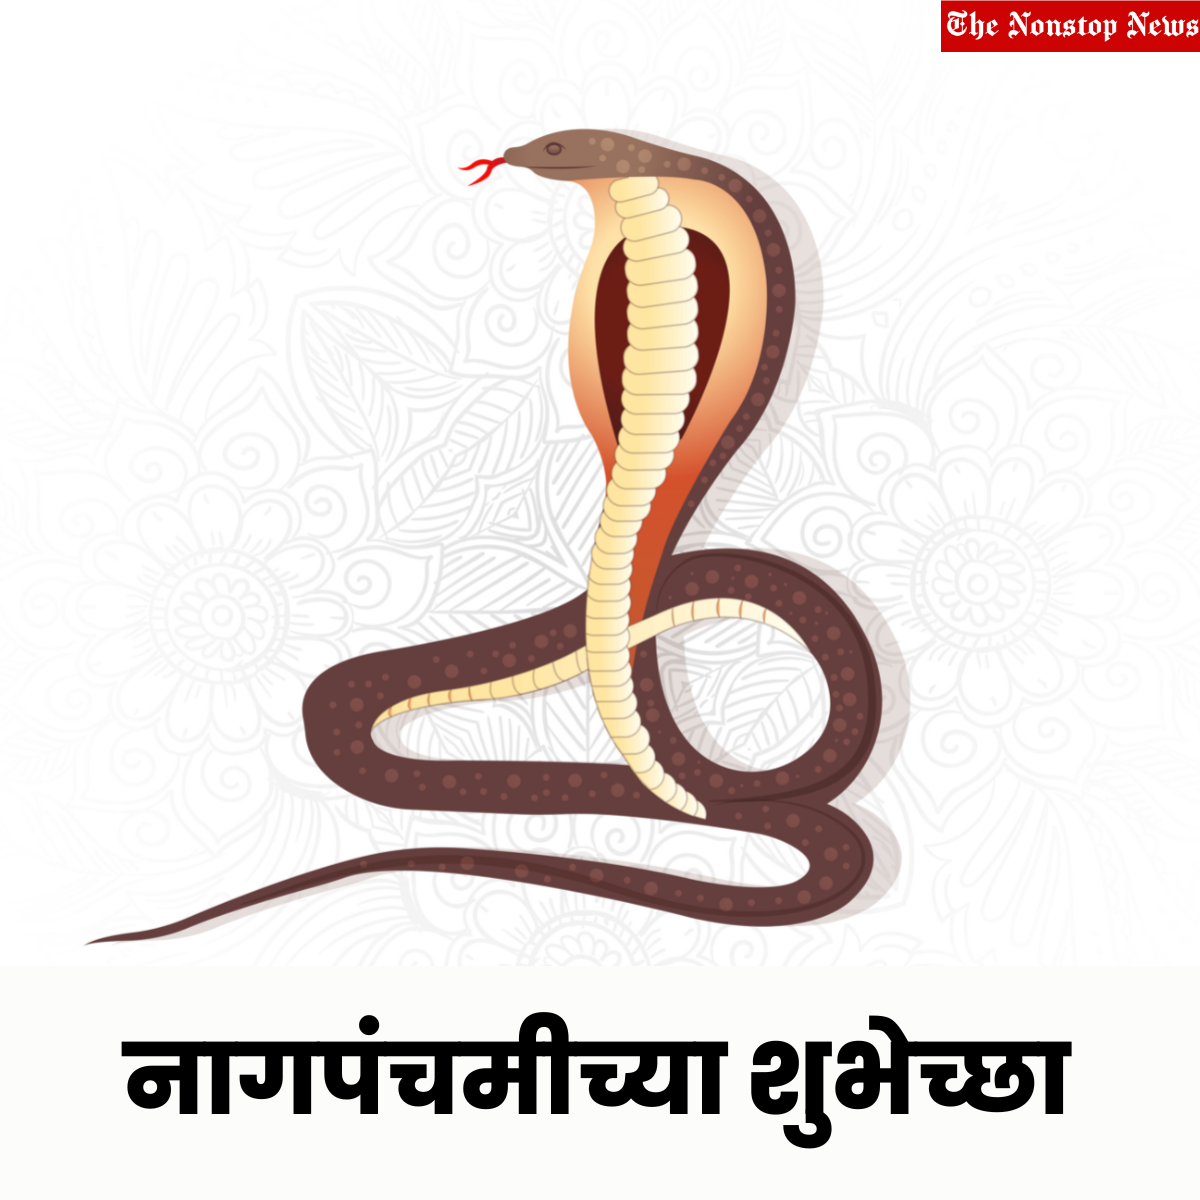 Nag Panchami 2022: Marathi Greetings, Wishes, Images, Quotes, Messages to share on social media